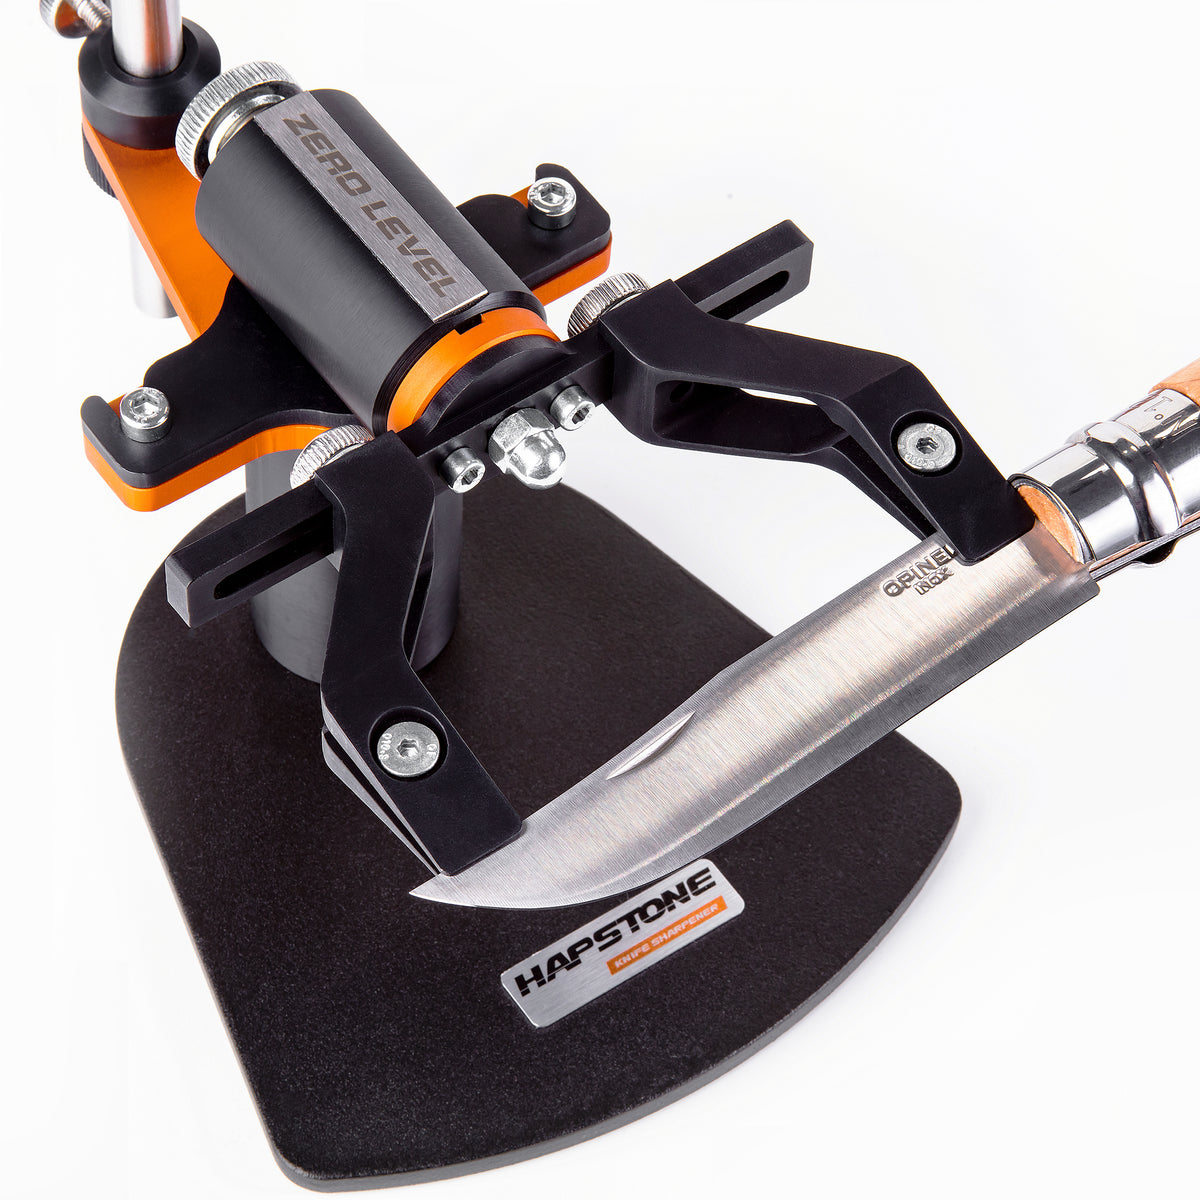 Jende JIGS for Knives - The Best Sharpening system for knives